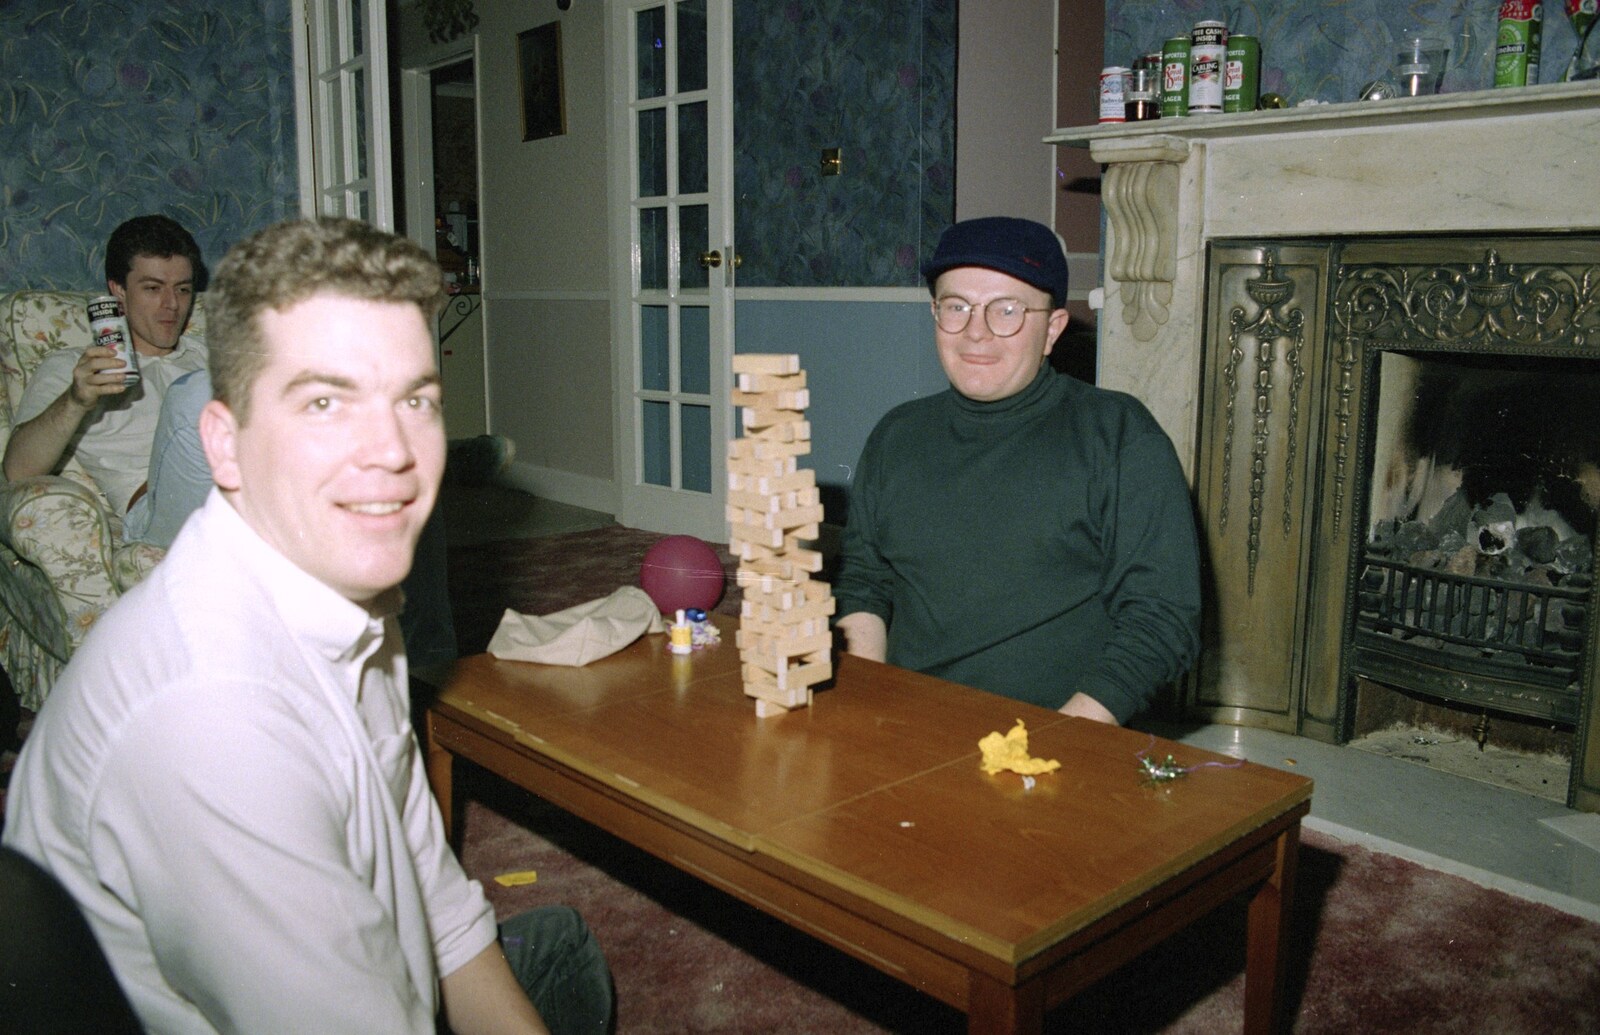 Jon and Hamish prepare for another session from Christmas Down South, Burton and Walkford, Dorset - 25th December 1994